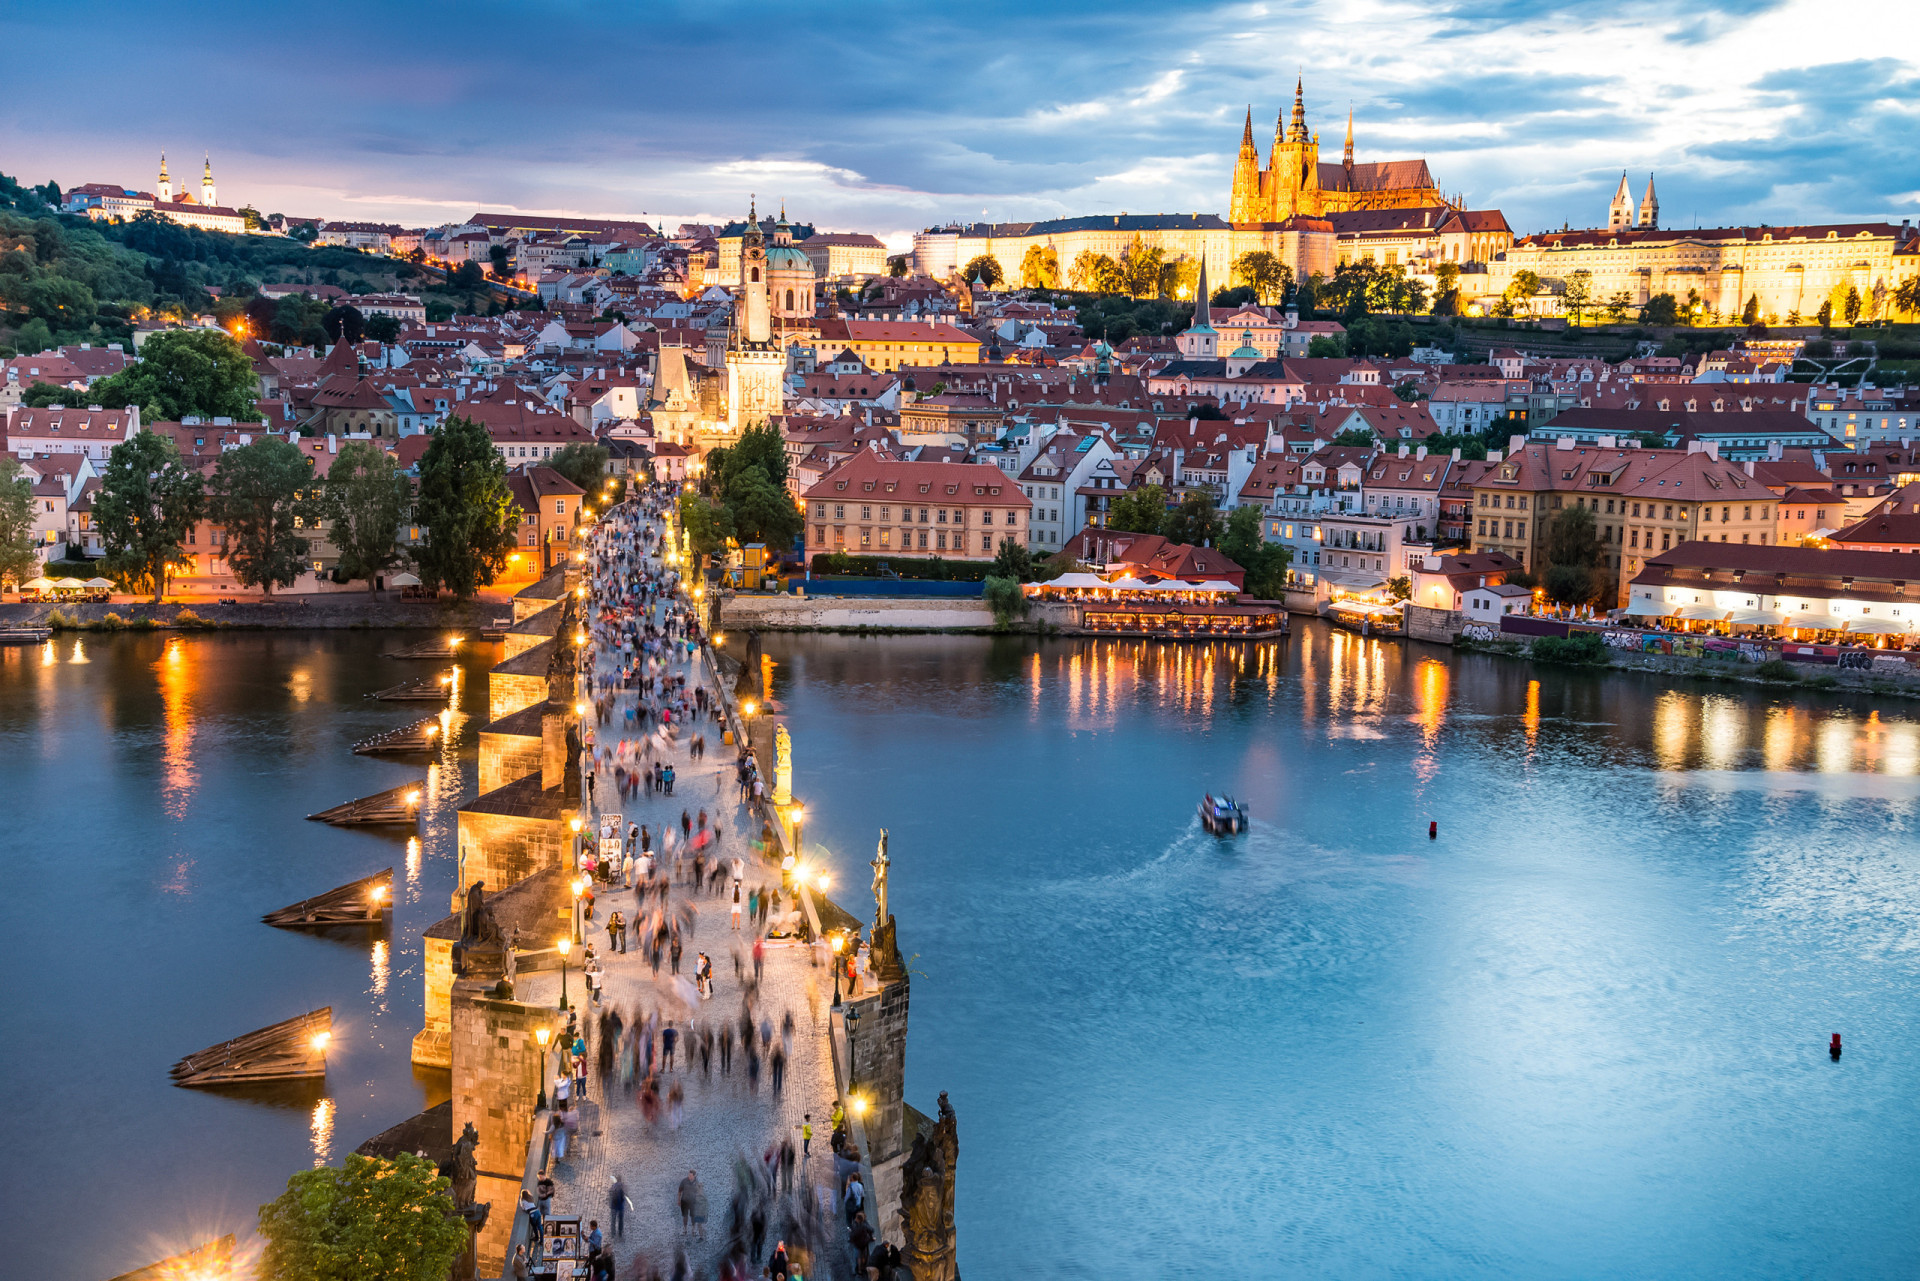 <p>In Prague, tourist tax typically costs around CZK50 (US$1.97) per night.</p><p>You may also like:<a href="https://www.starsinsider.com/n/249074?utm_source=msn.com&utm_medium=display&utm_campaign=referral_description&utm_content=683481en-my"> The most-asked "why" questions on Google</a></p>